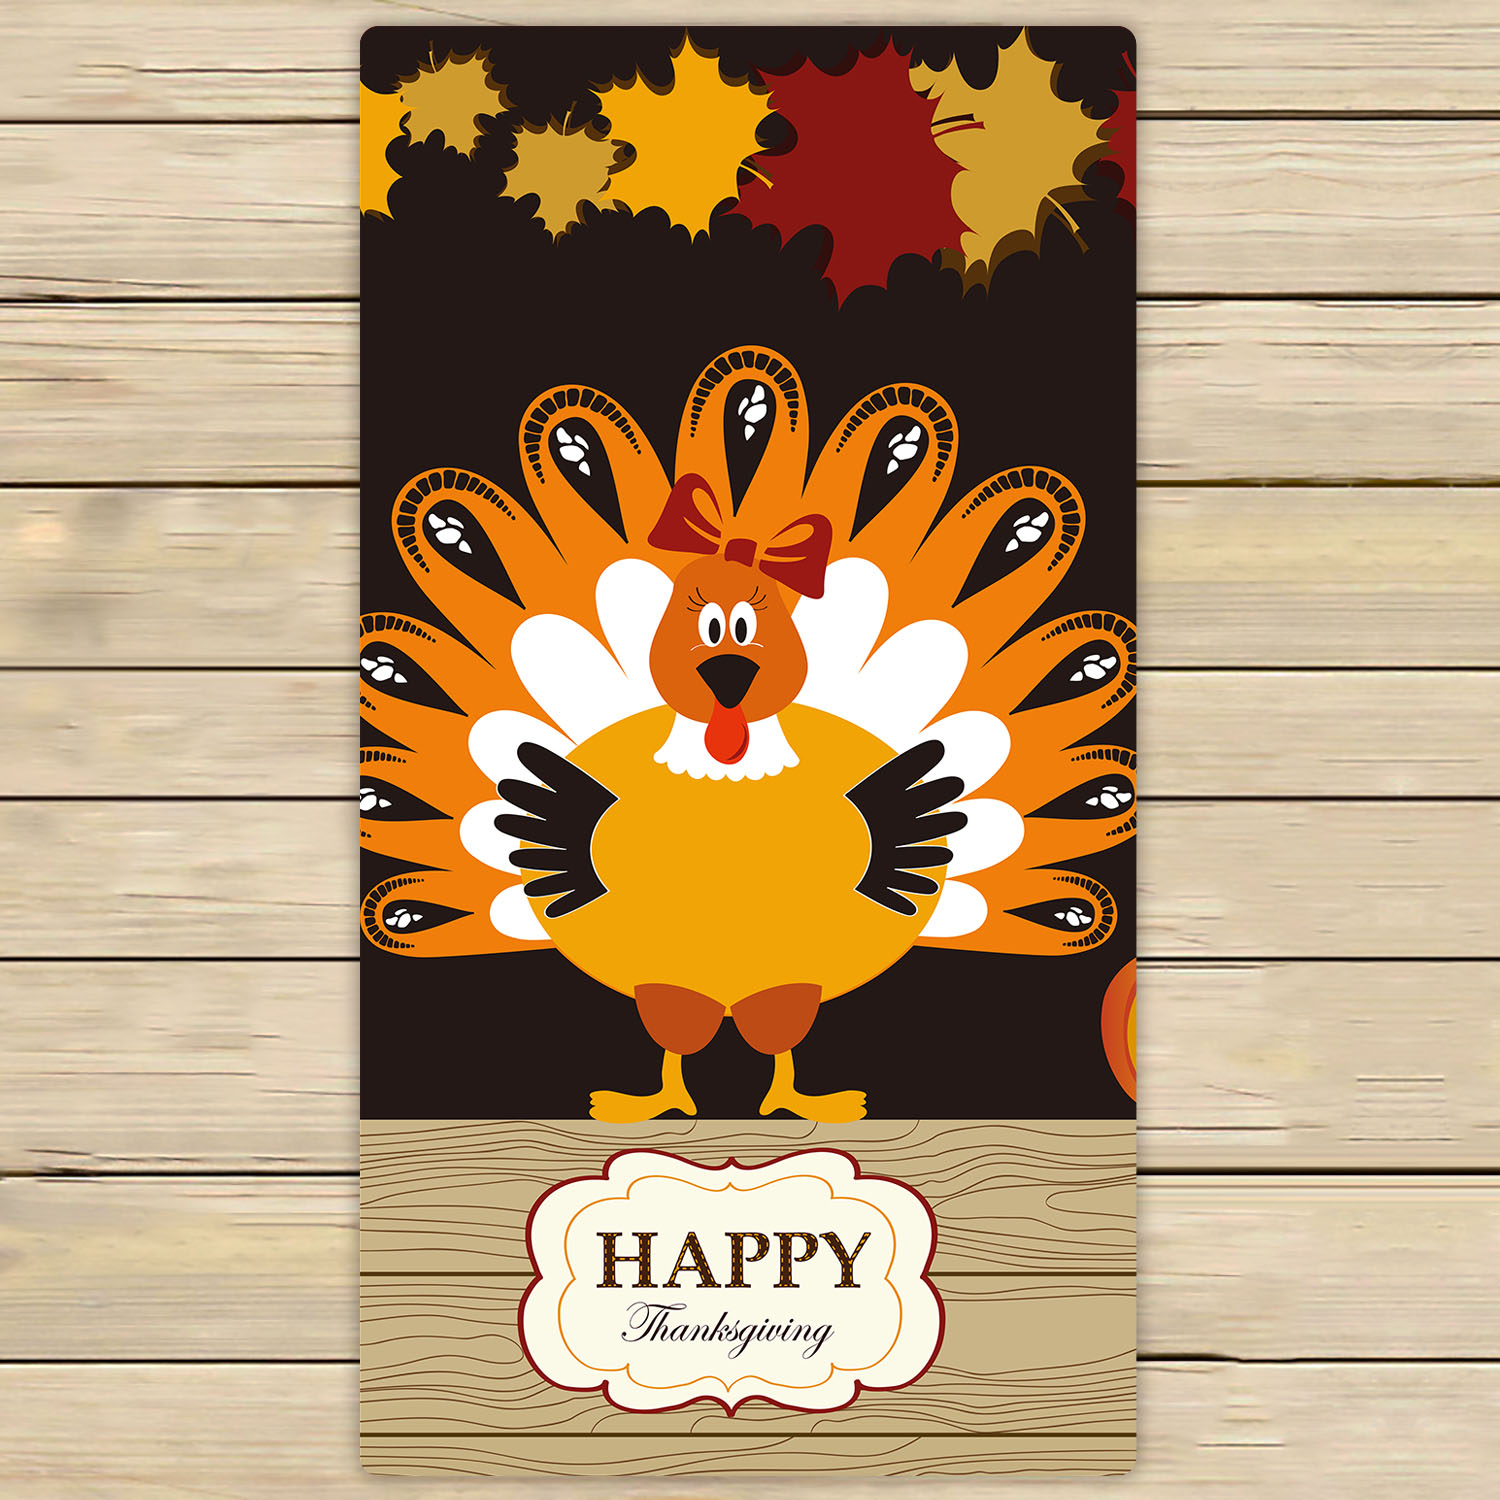 Thanksgiving Turkey Pumpkin Hand Towels 16x30 in Autumn Harvest Maple Leaf Bathroom Towel Ultra Soft Highly Absorbent Small Bath Towel Kitchen Dish Guest Towel Home Bathroom Decorations